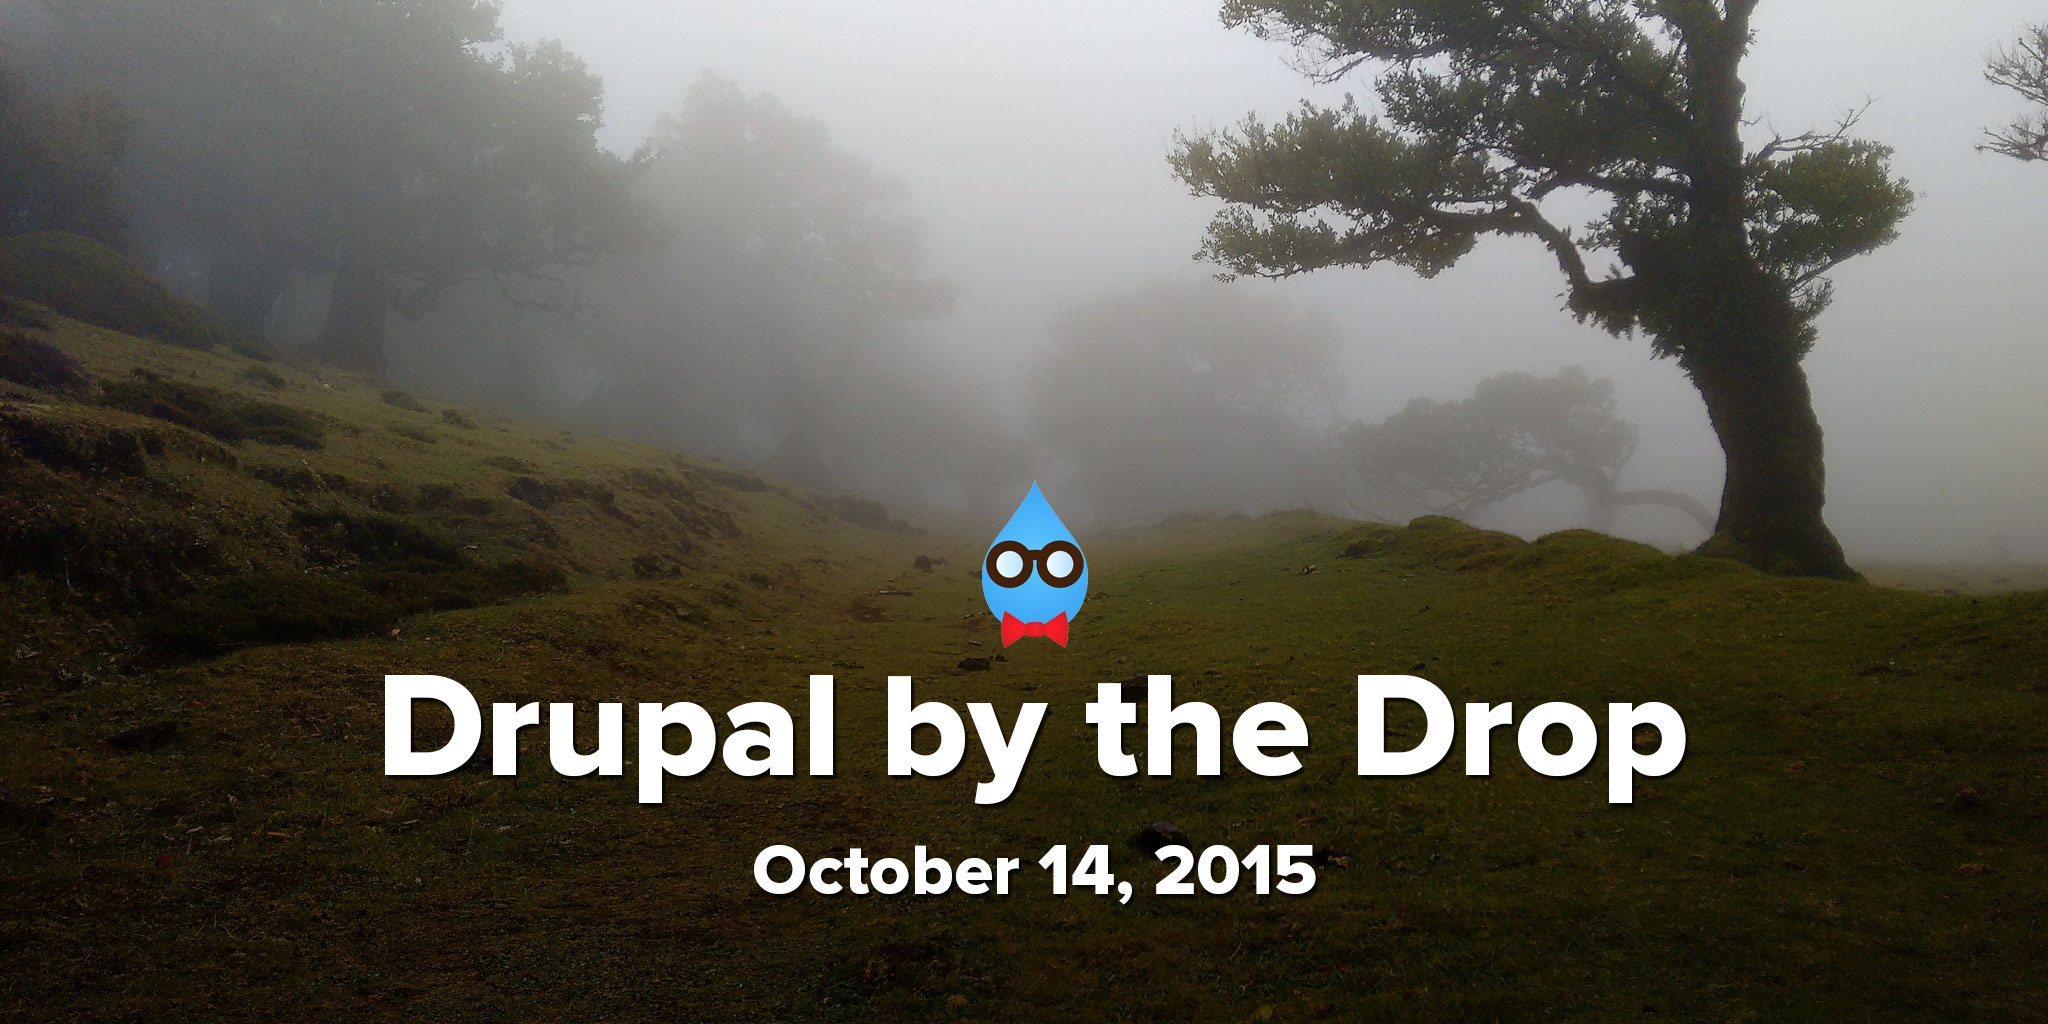 Drupal by the Drop: October 14, 2015